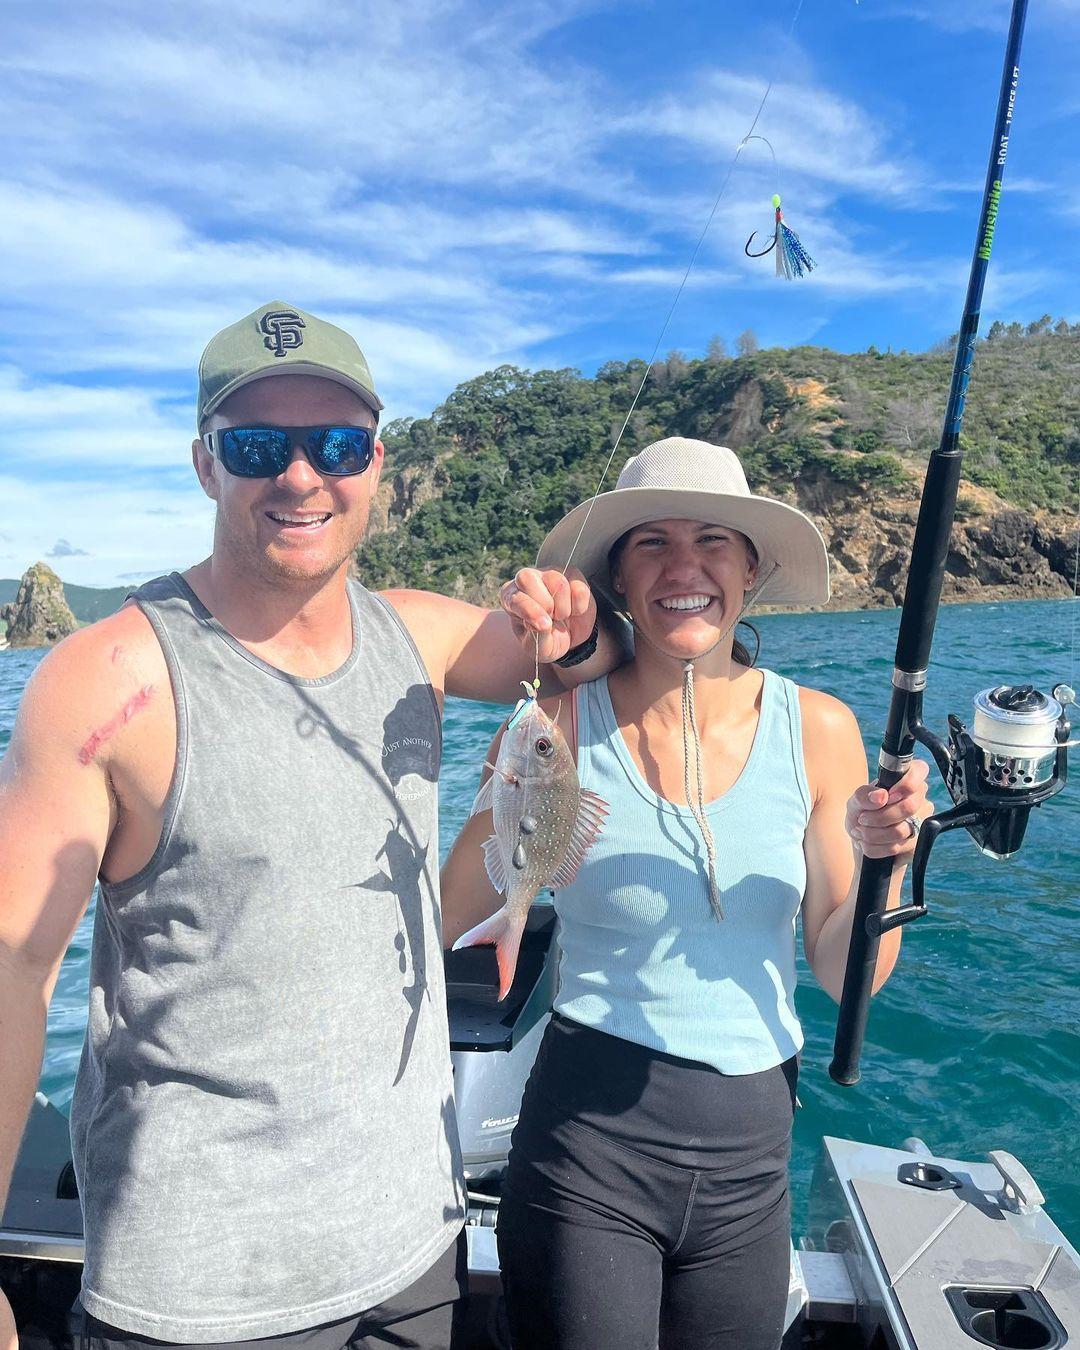 class="content__text"
 First fish caught on the new Stabi goes to Hattie, surely they can only get bigger from here… 🤞🏼
Finally a break in the bad weather allowed us to get out for an awesome family arvo on the water. 🎣 
 